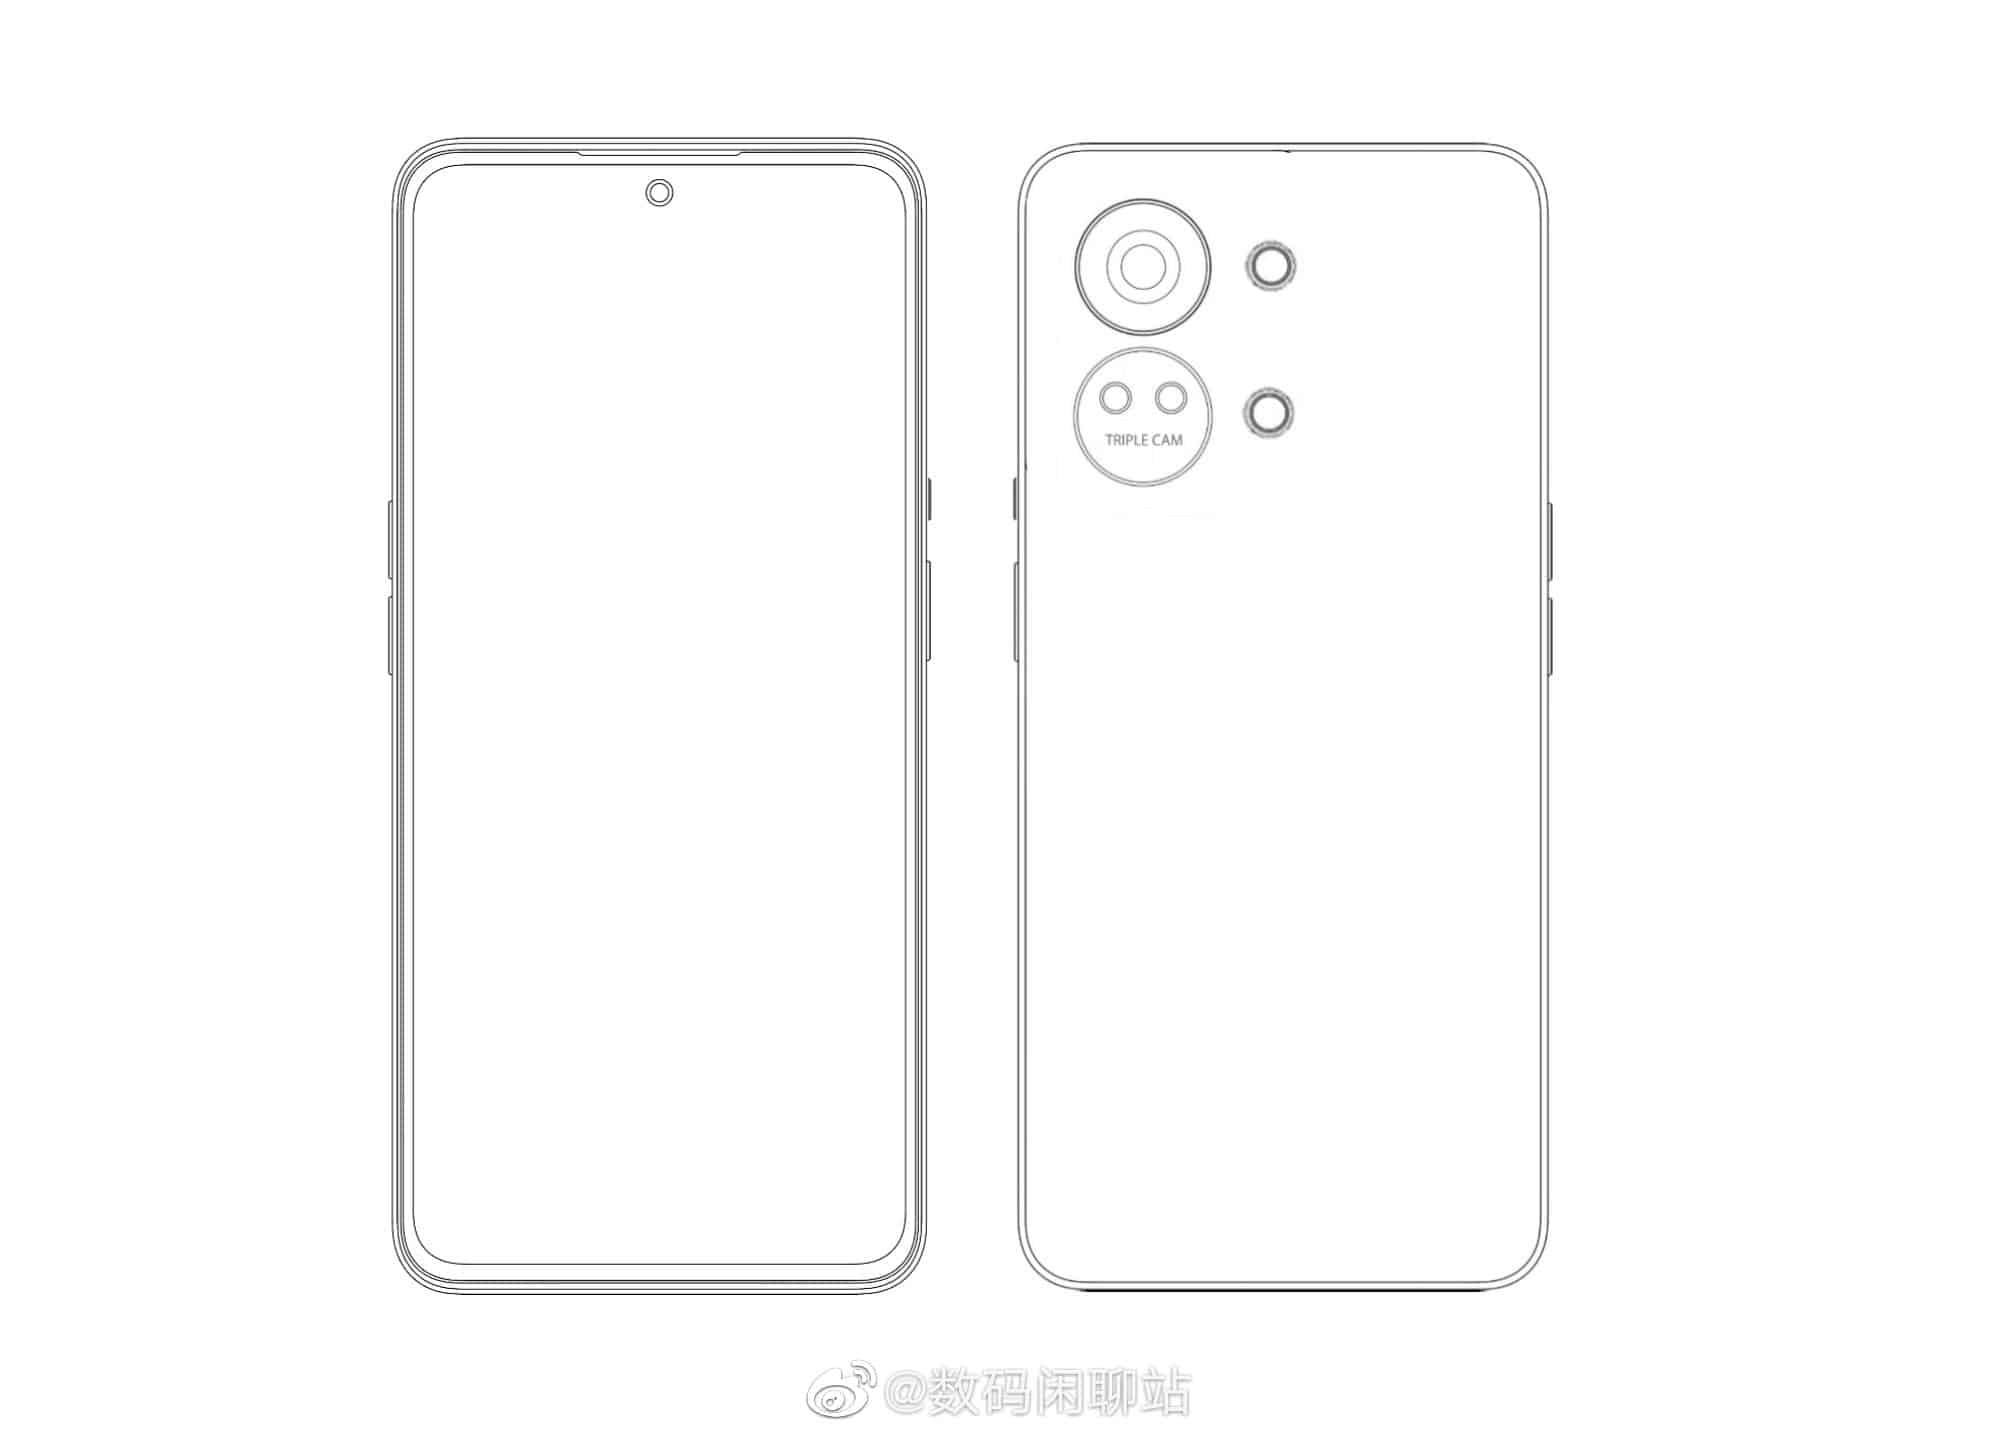 OnePlus Nord 3 leaked sketch